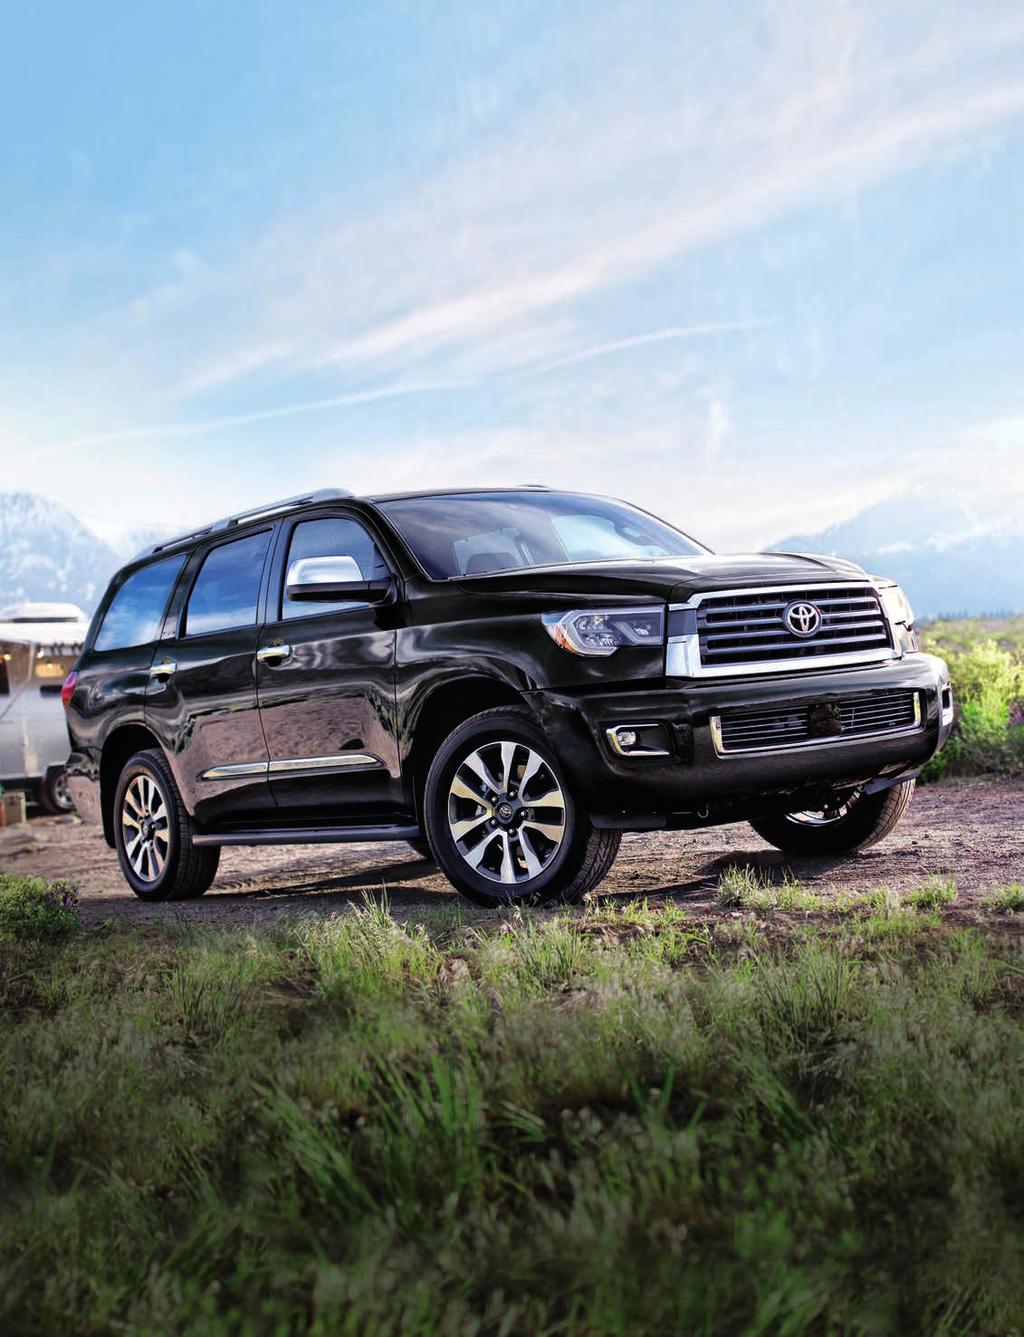 ROUGH IT COMFORTABLY REDEFINING THE PHRASE UP FOR ANYTHING. The 2019 Sequoia is anything but ordinary. Built to last. Trusted worldwide.